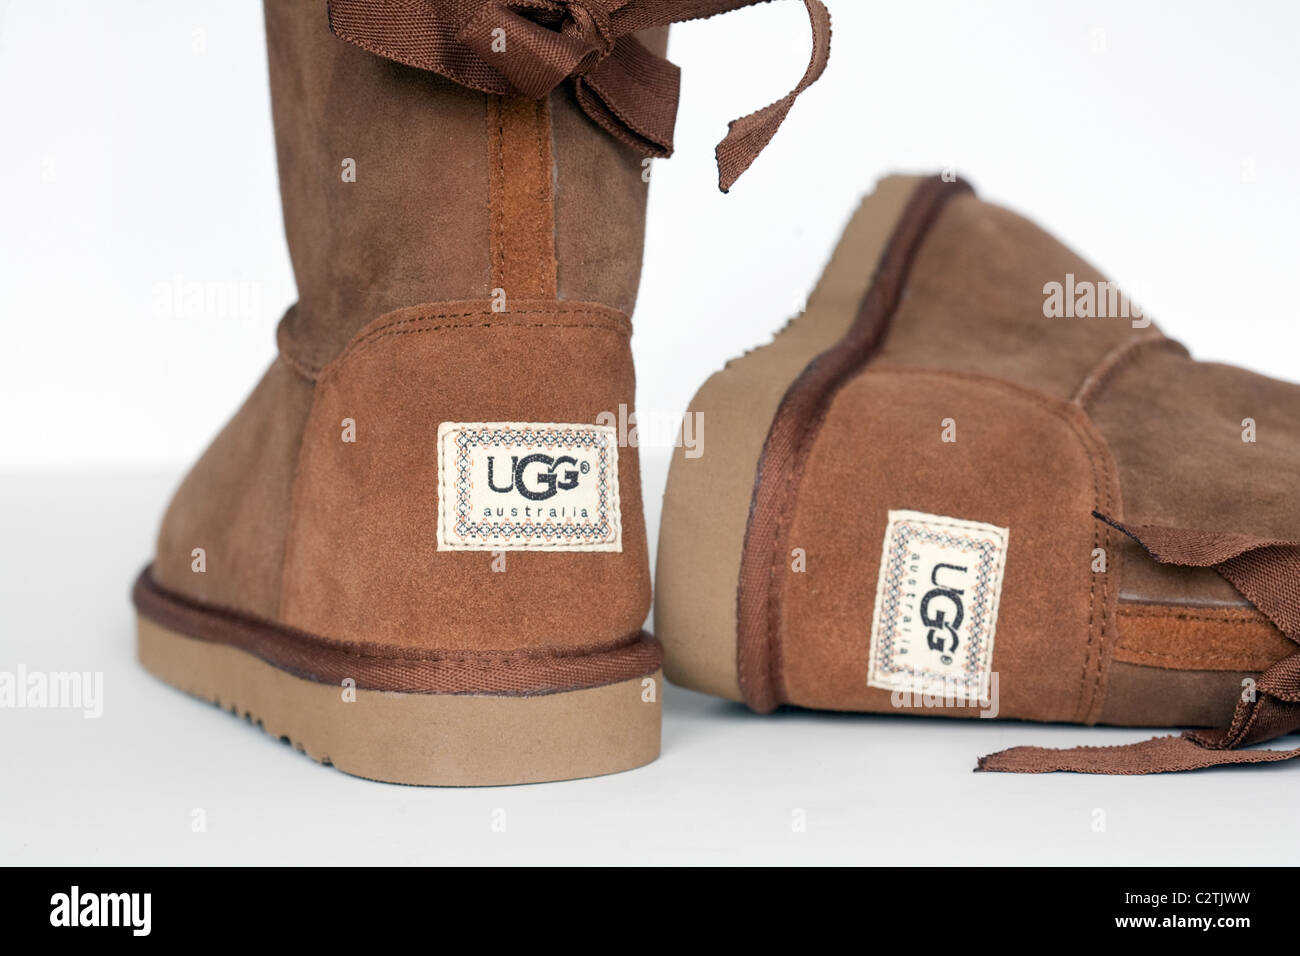 are uggs made in china